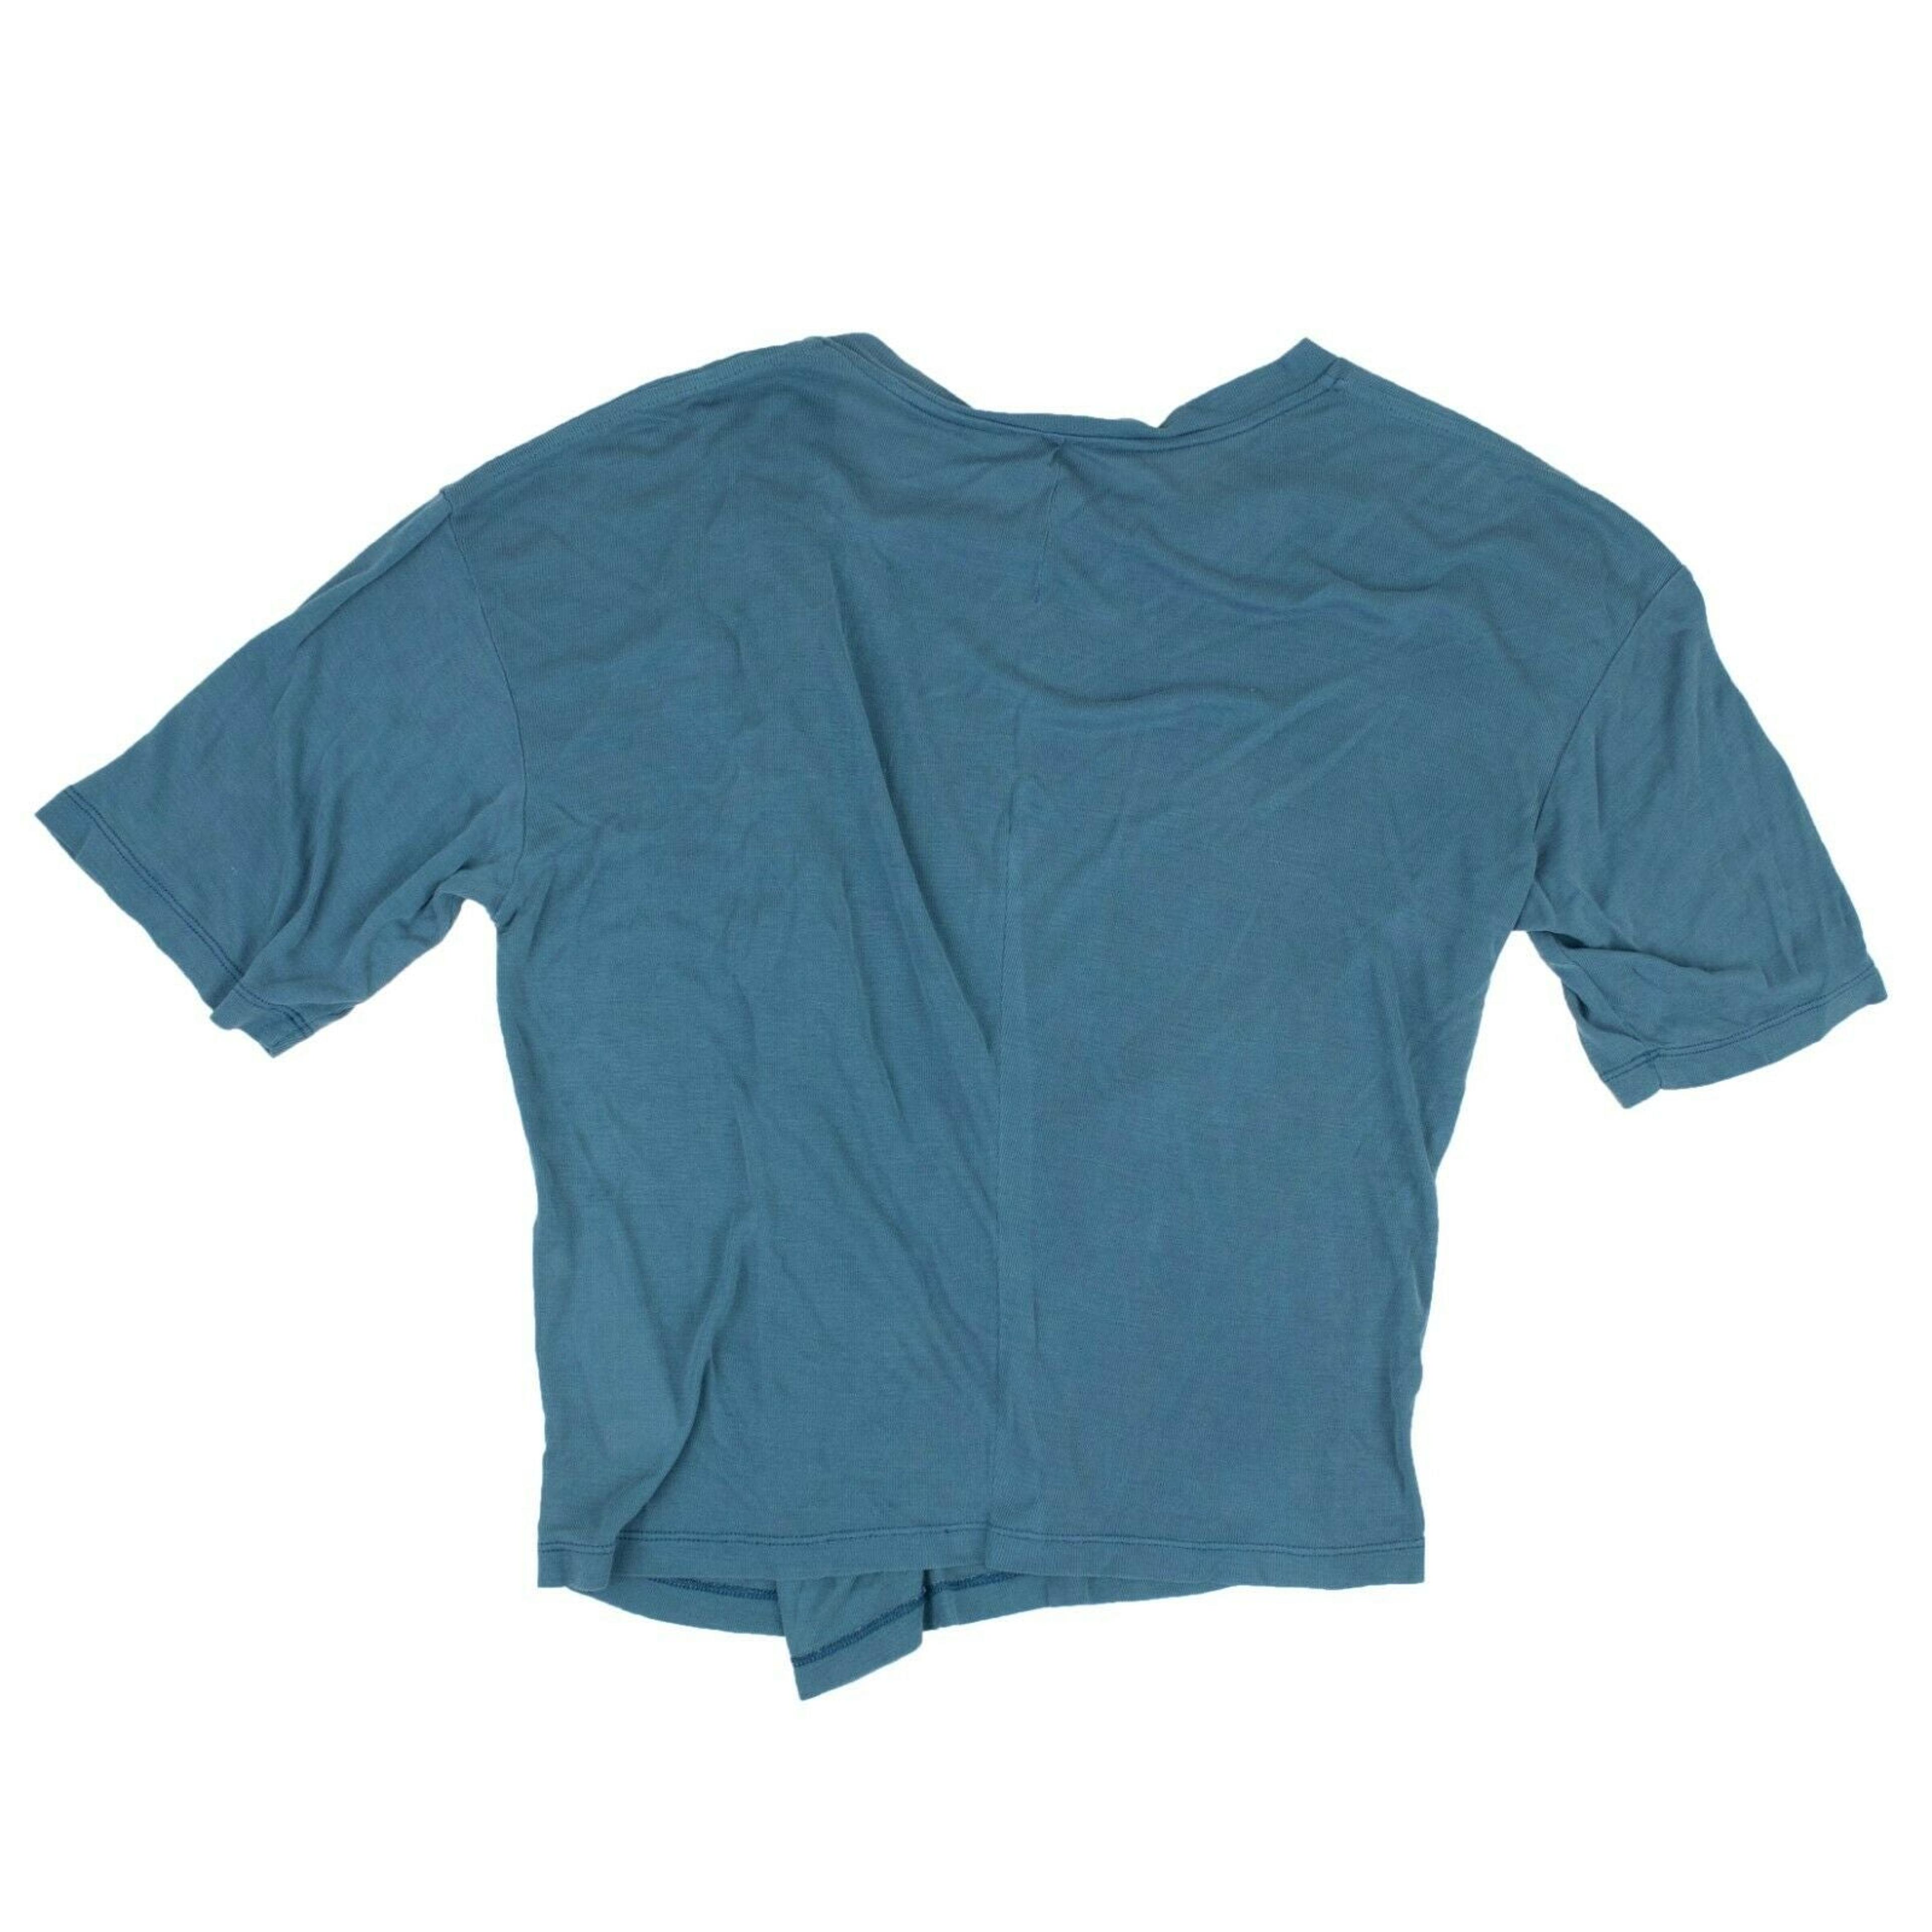 Alternate View 1 of Unravel Project Twist T-Shirt - Blue